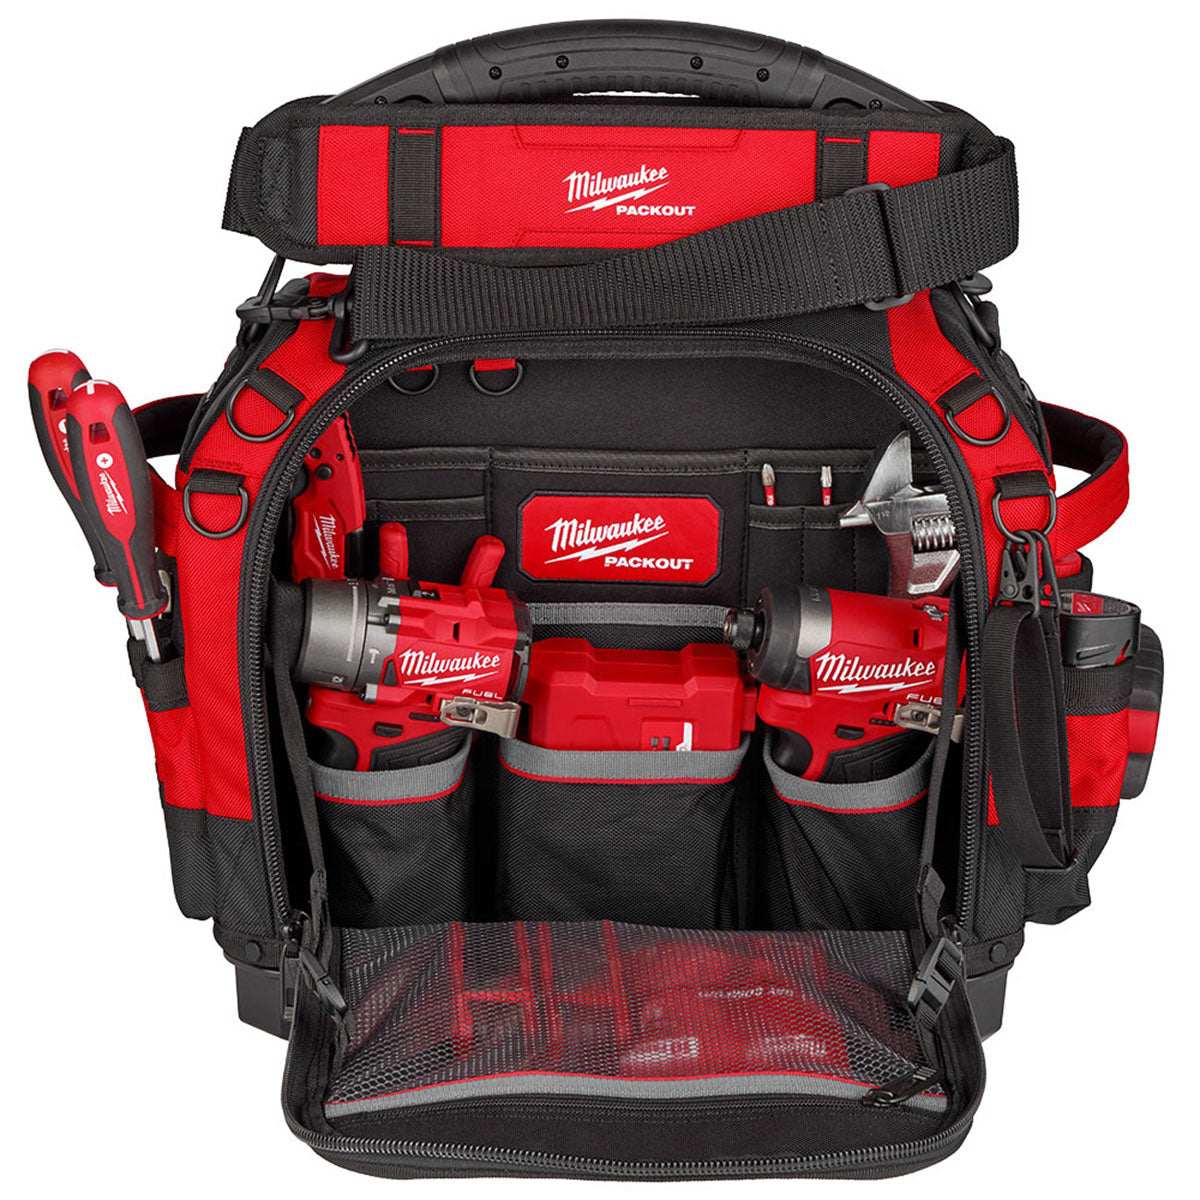 Milwaukee PACKOUT 38cm Closed Tote Tool Bag 4932493623